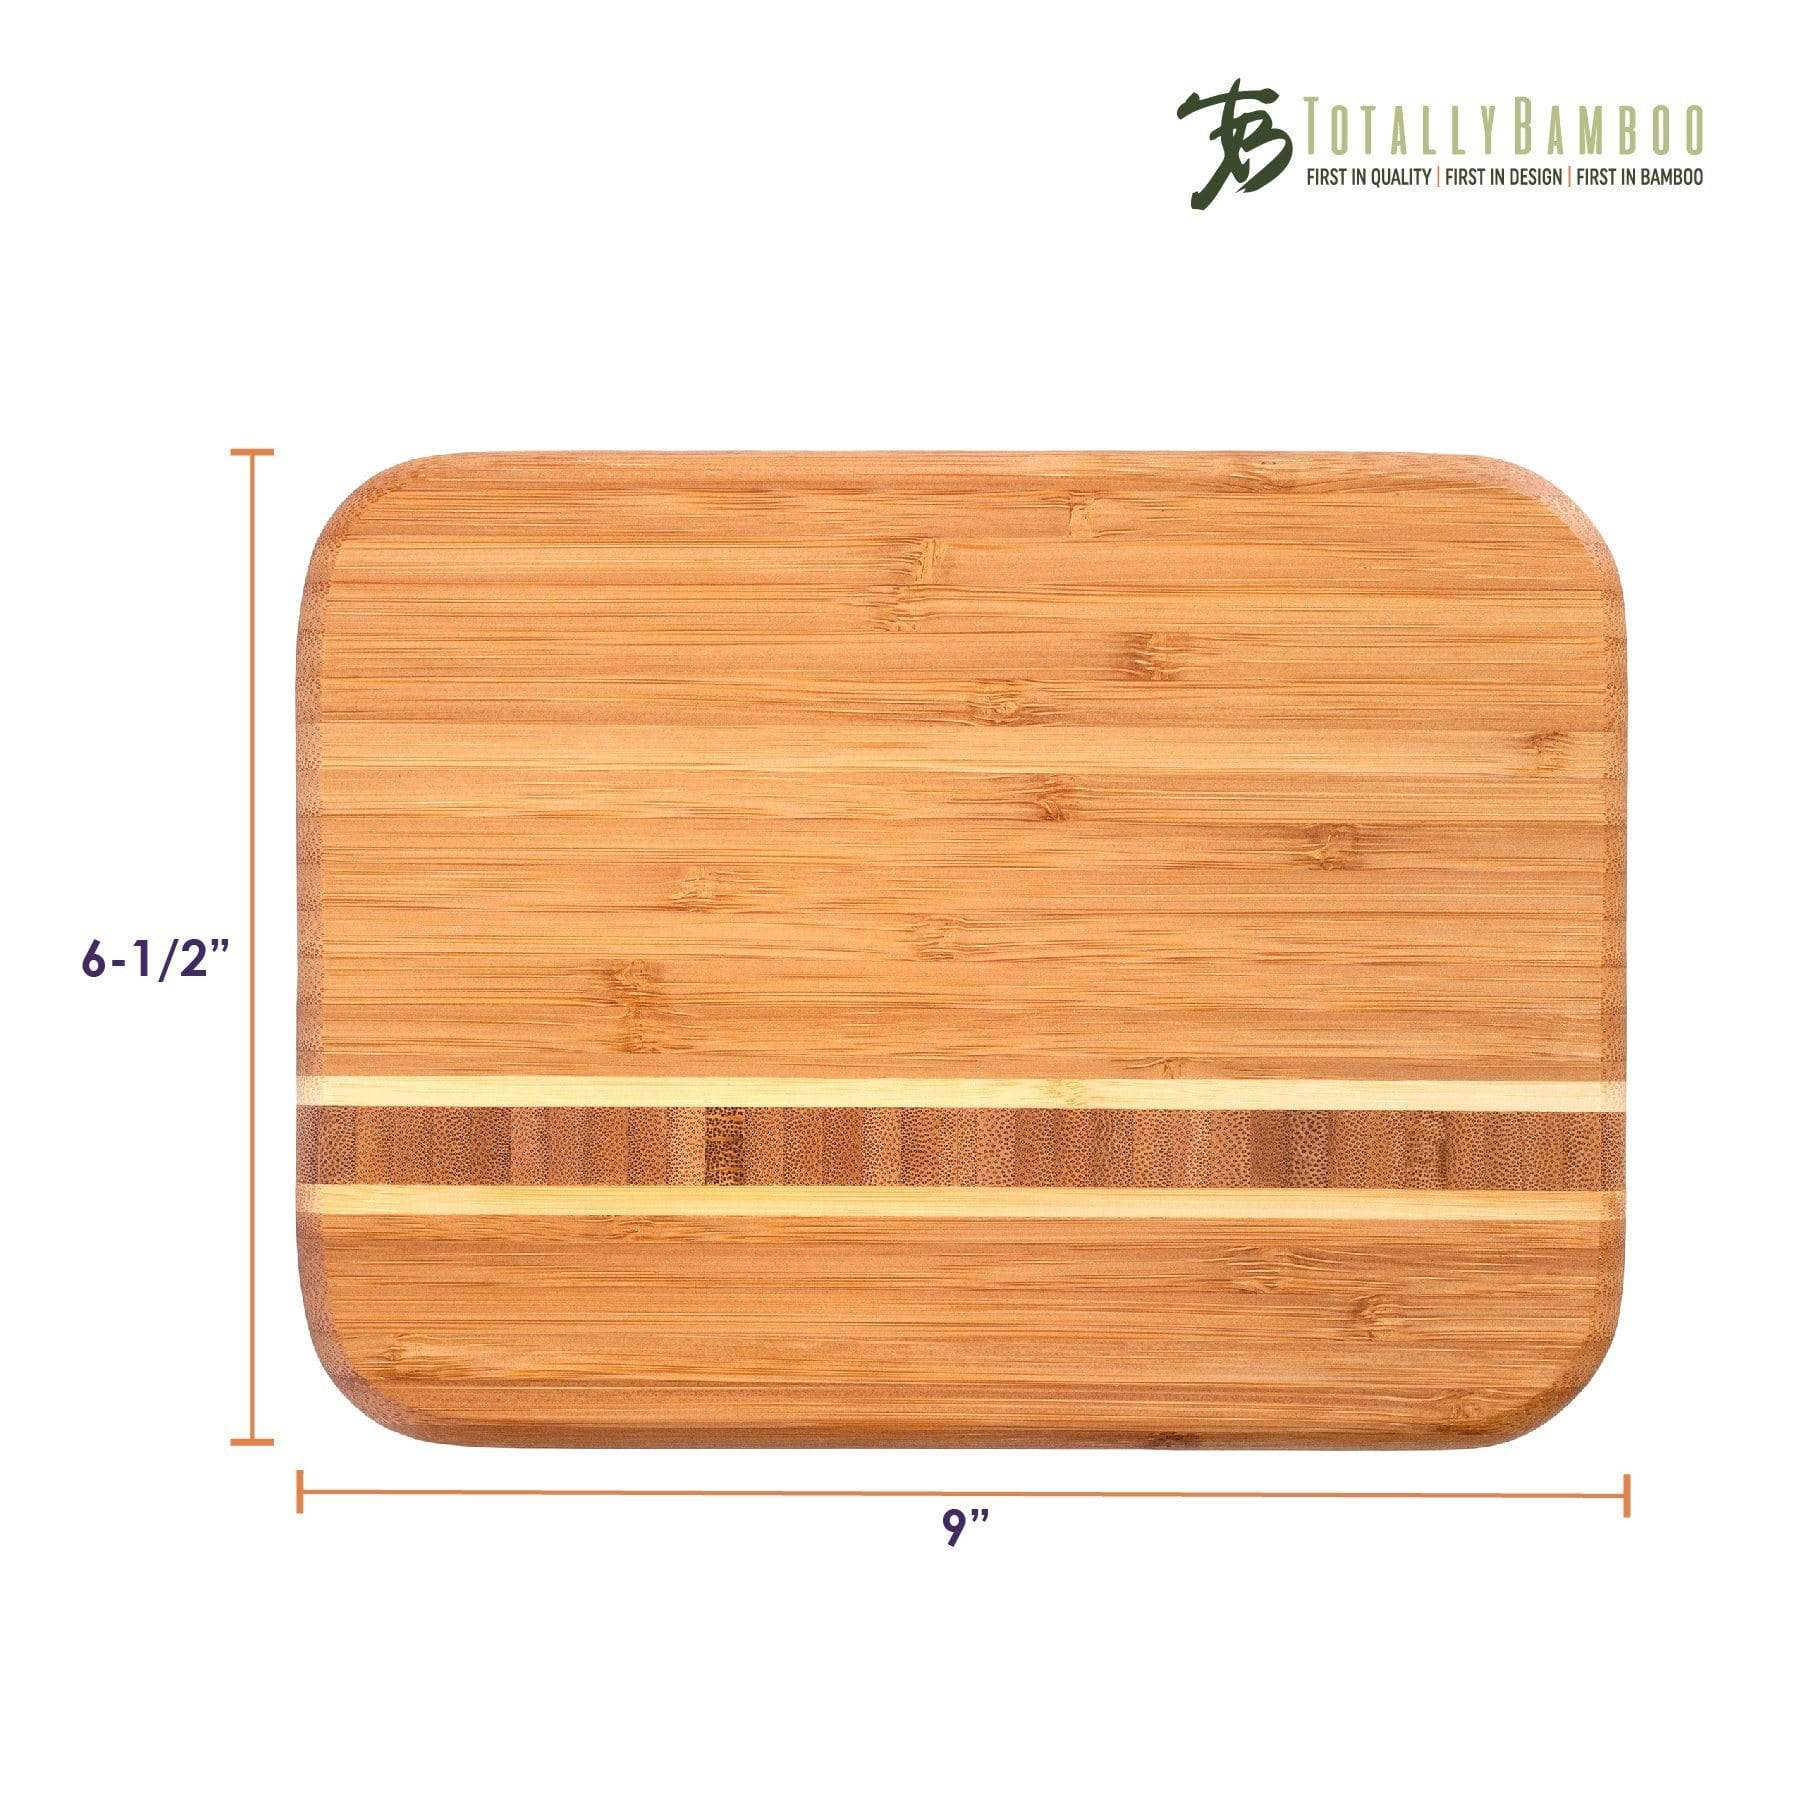 Totally Bamboo Barbados Serving & Cutting Board, 9" x 6-1/2"